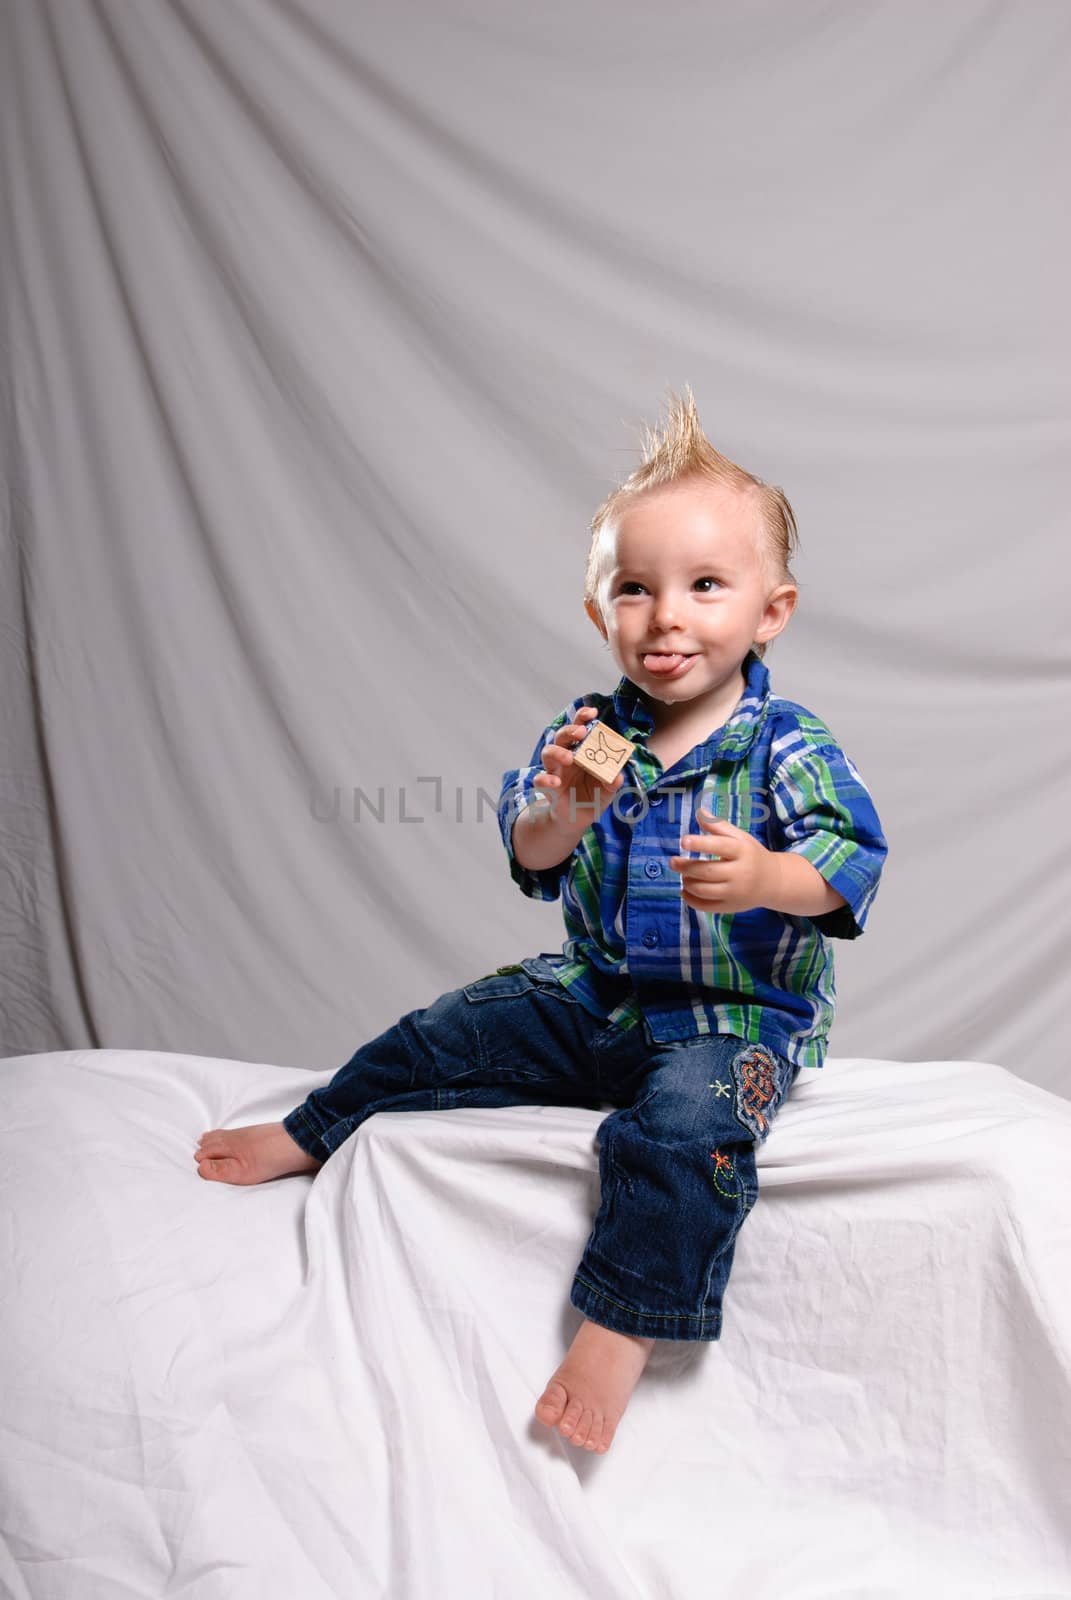 A young boy making a funny face while getting his portrait done